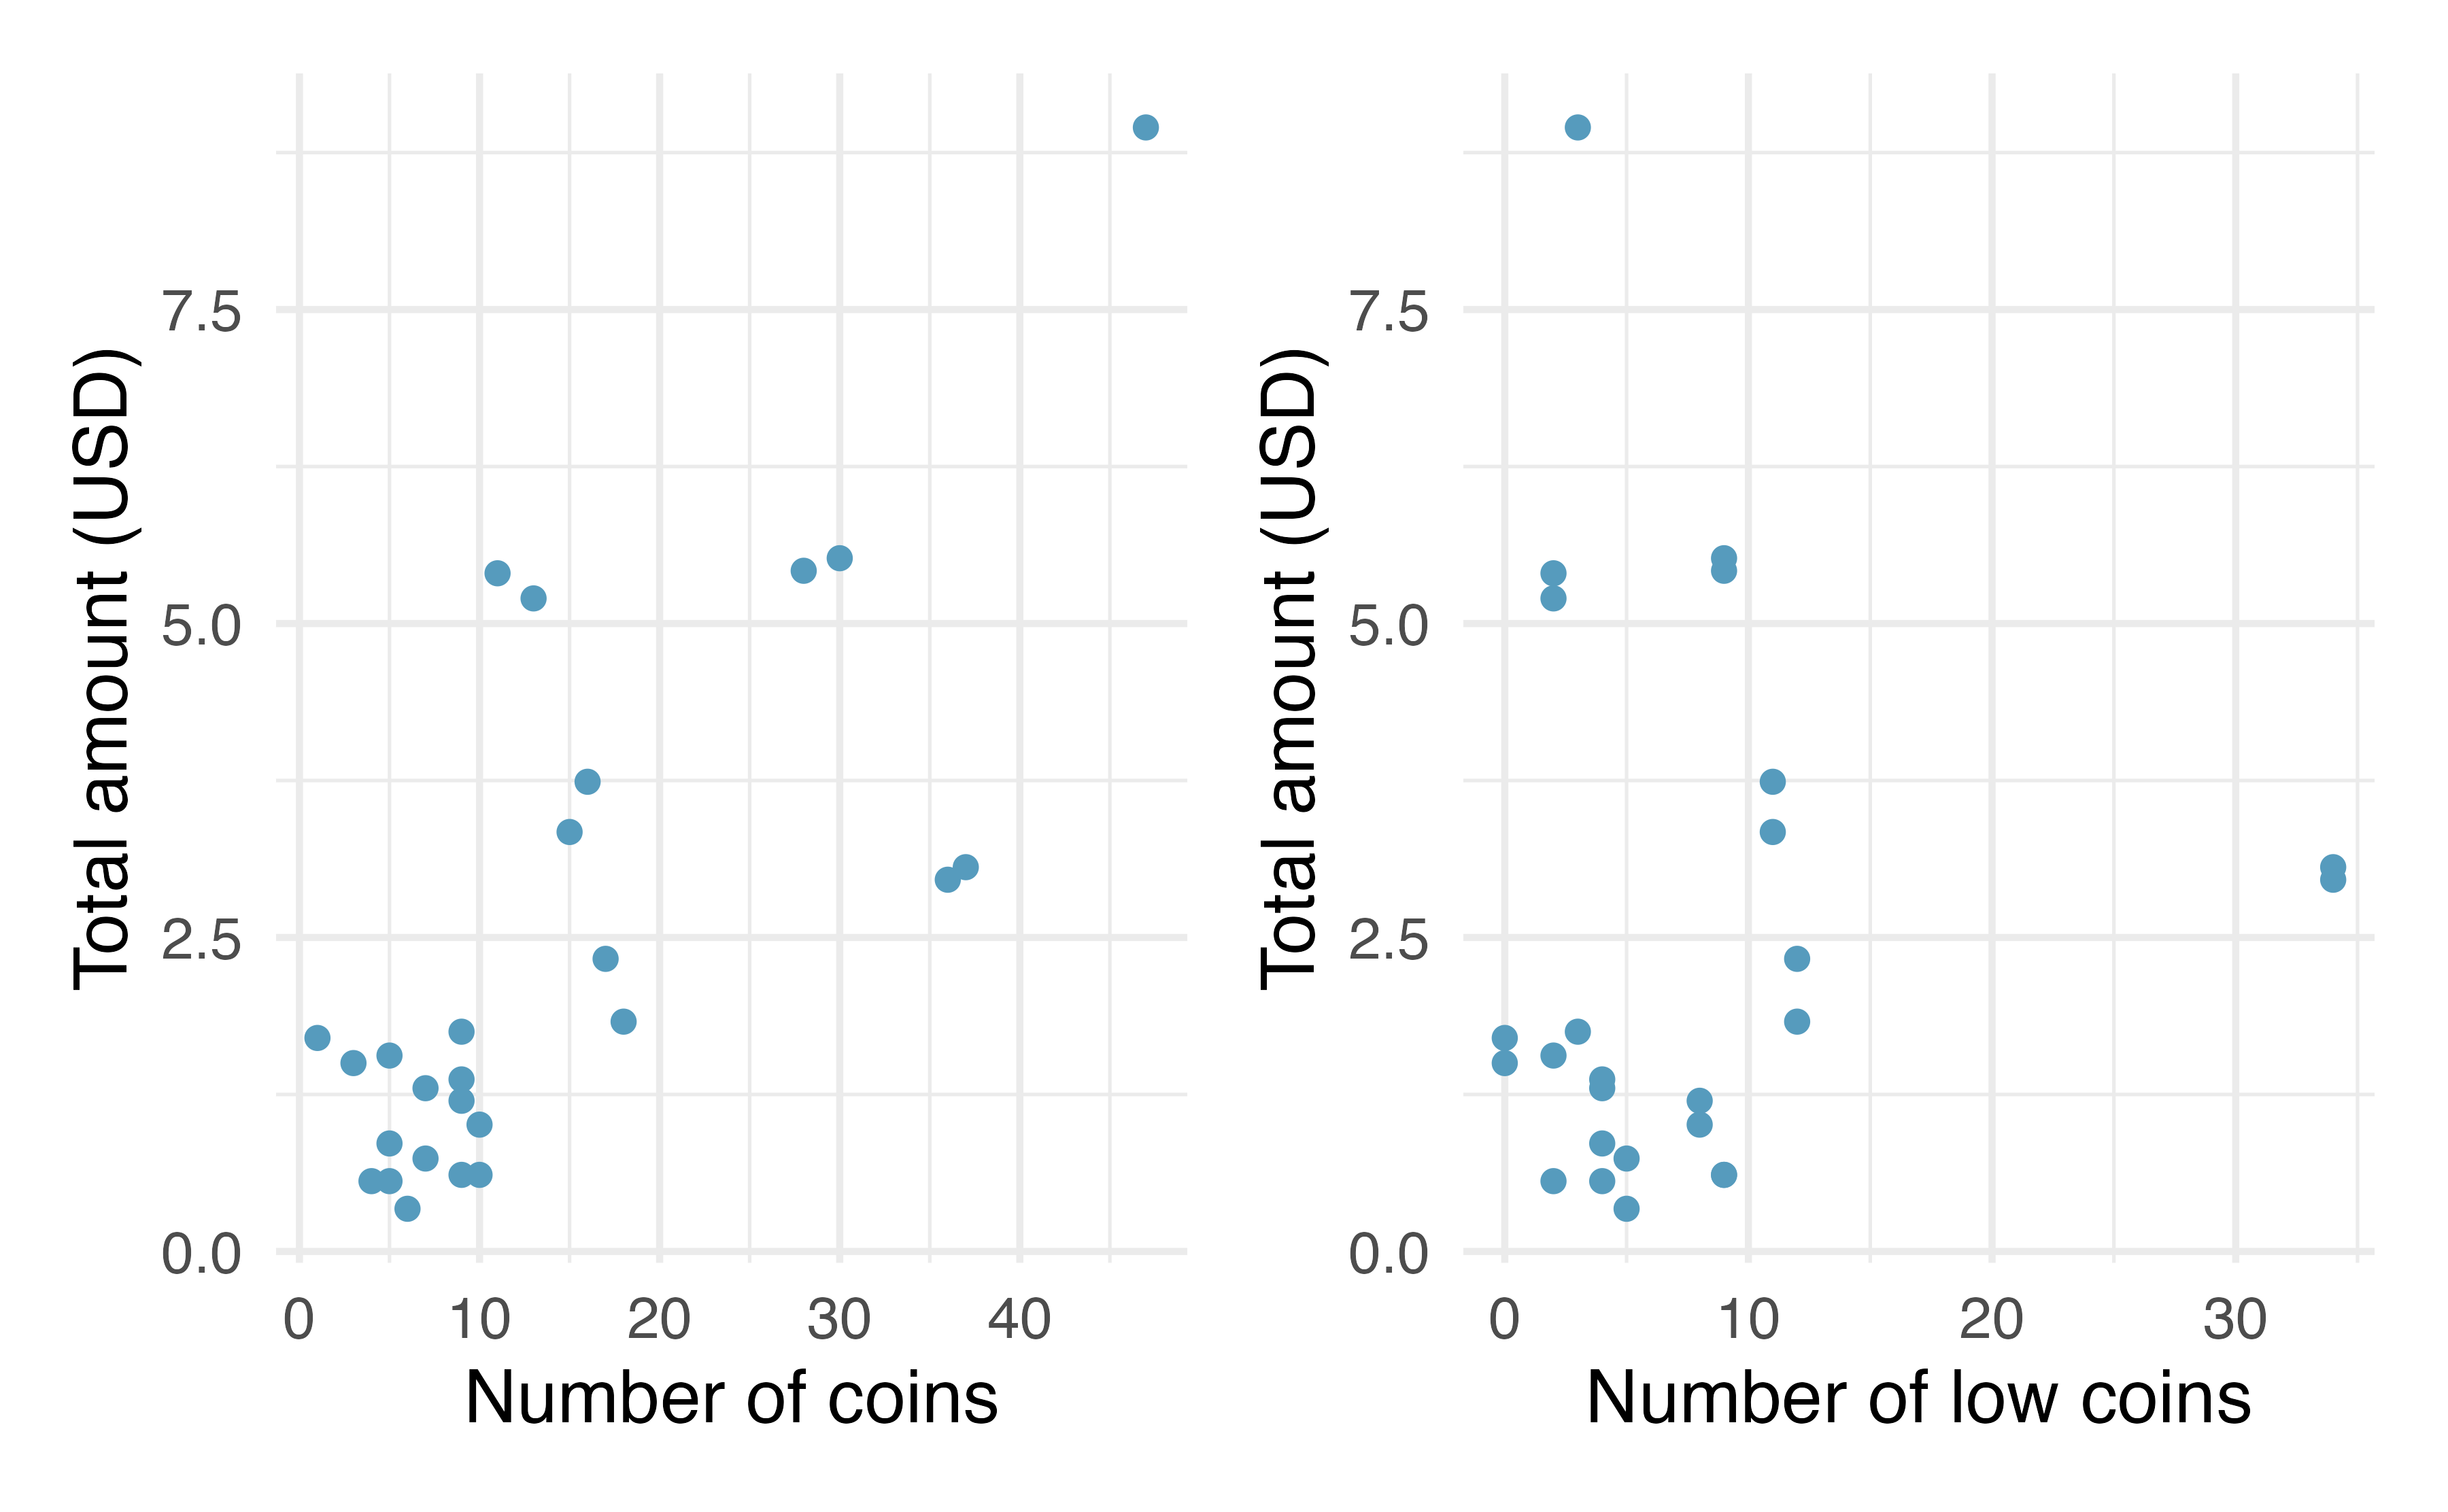 Two scatterplots, both with total amount of money on the y-axis.  The left plot has total number of coins on the x-axis. The right plot has number of low coins on the x-axis.  Both plots show positive correlation, but the total number of coins plot is more strongly correlated than the number of low coins plot.